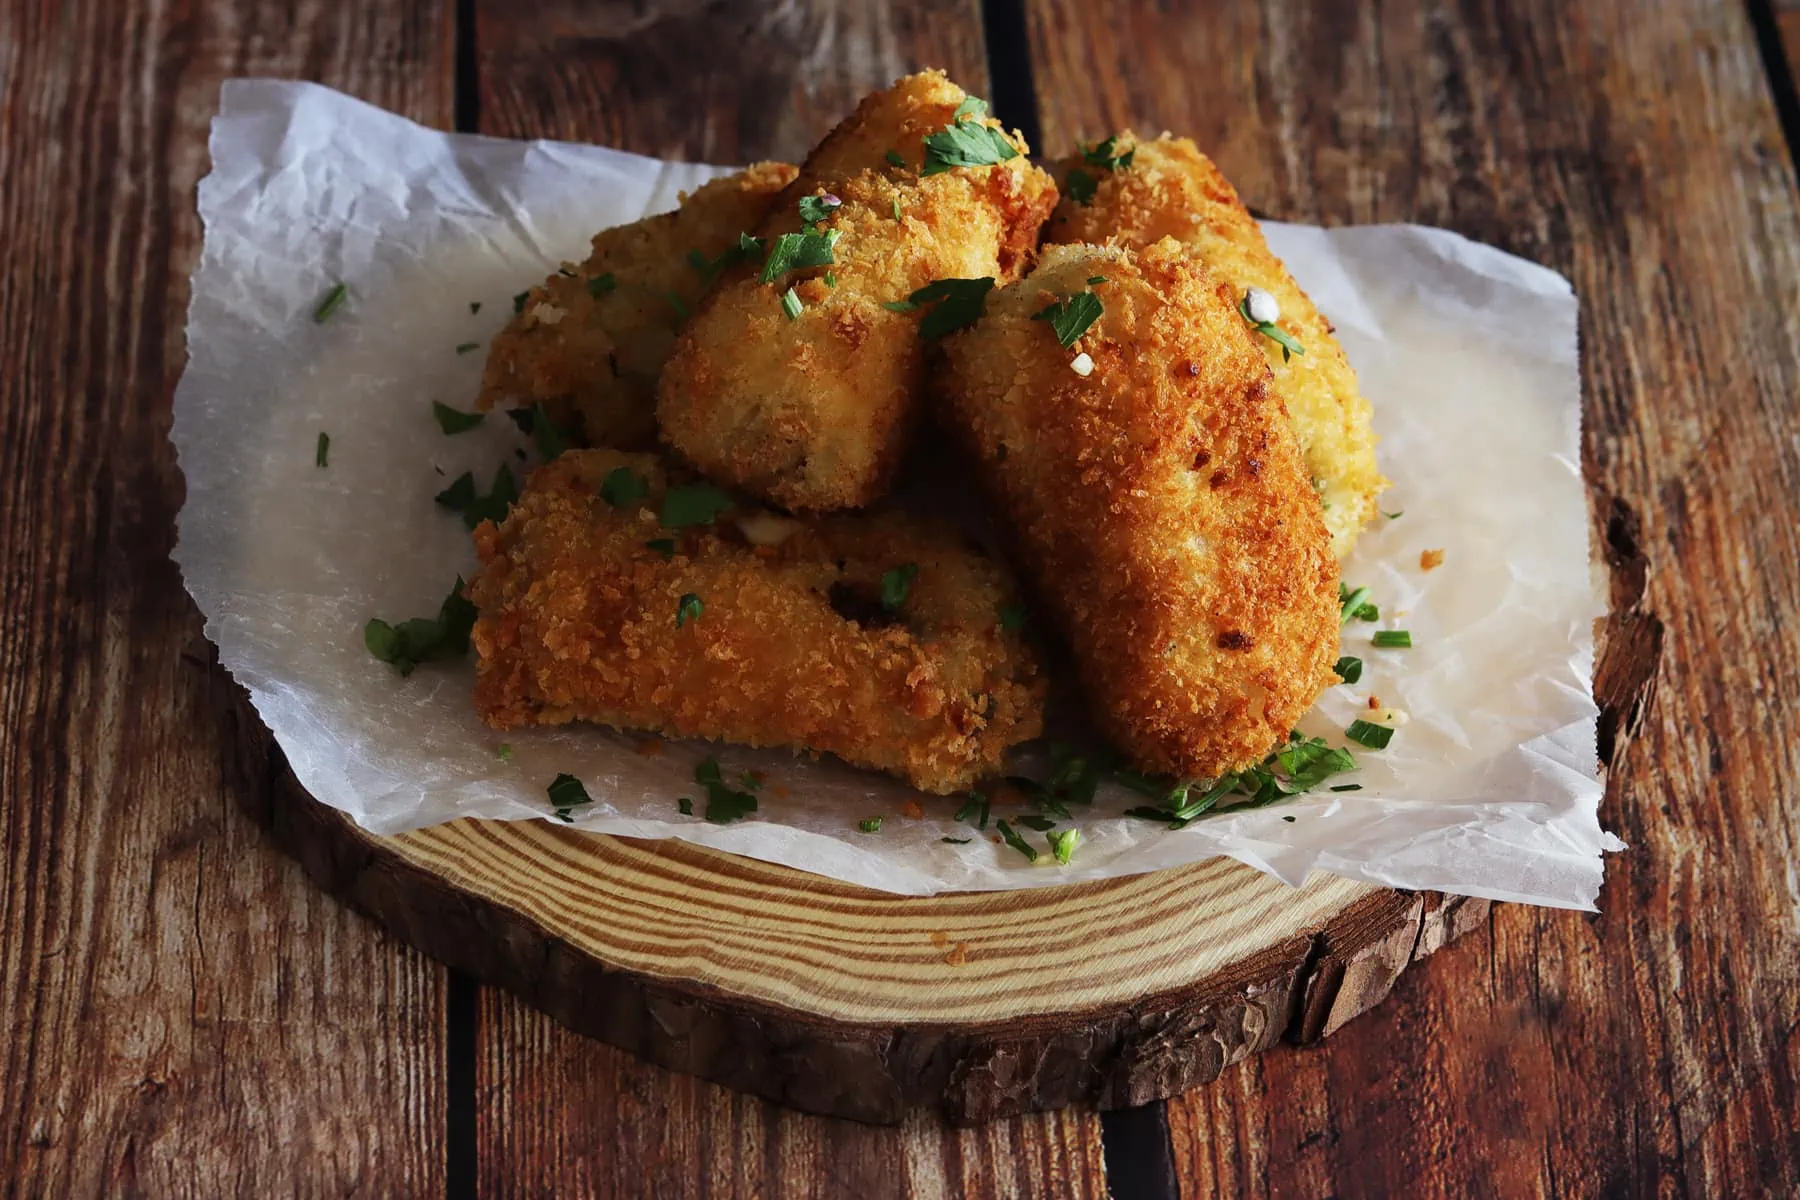 Potato and Cheese Croquettes